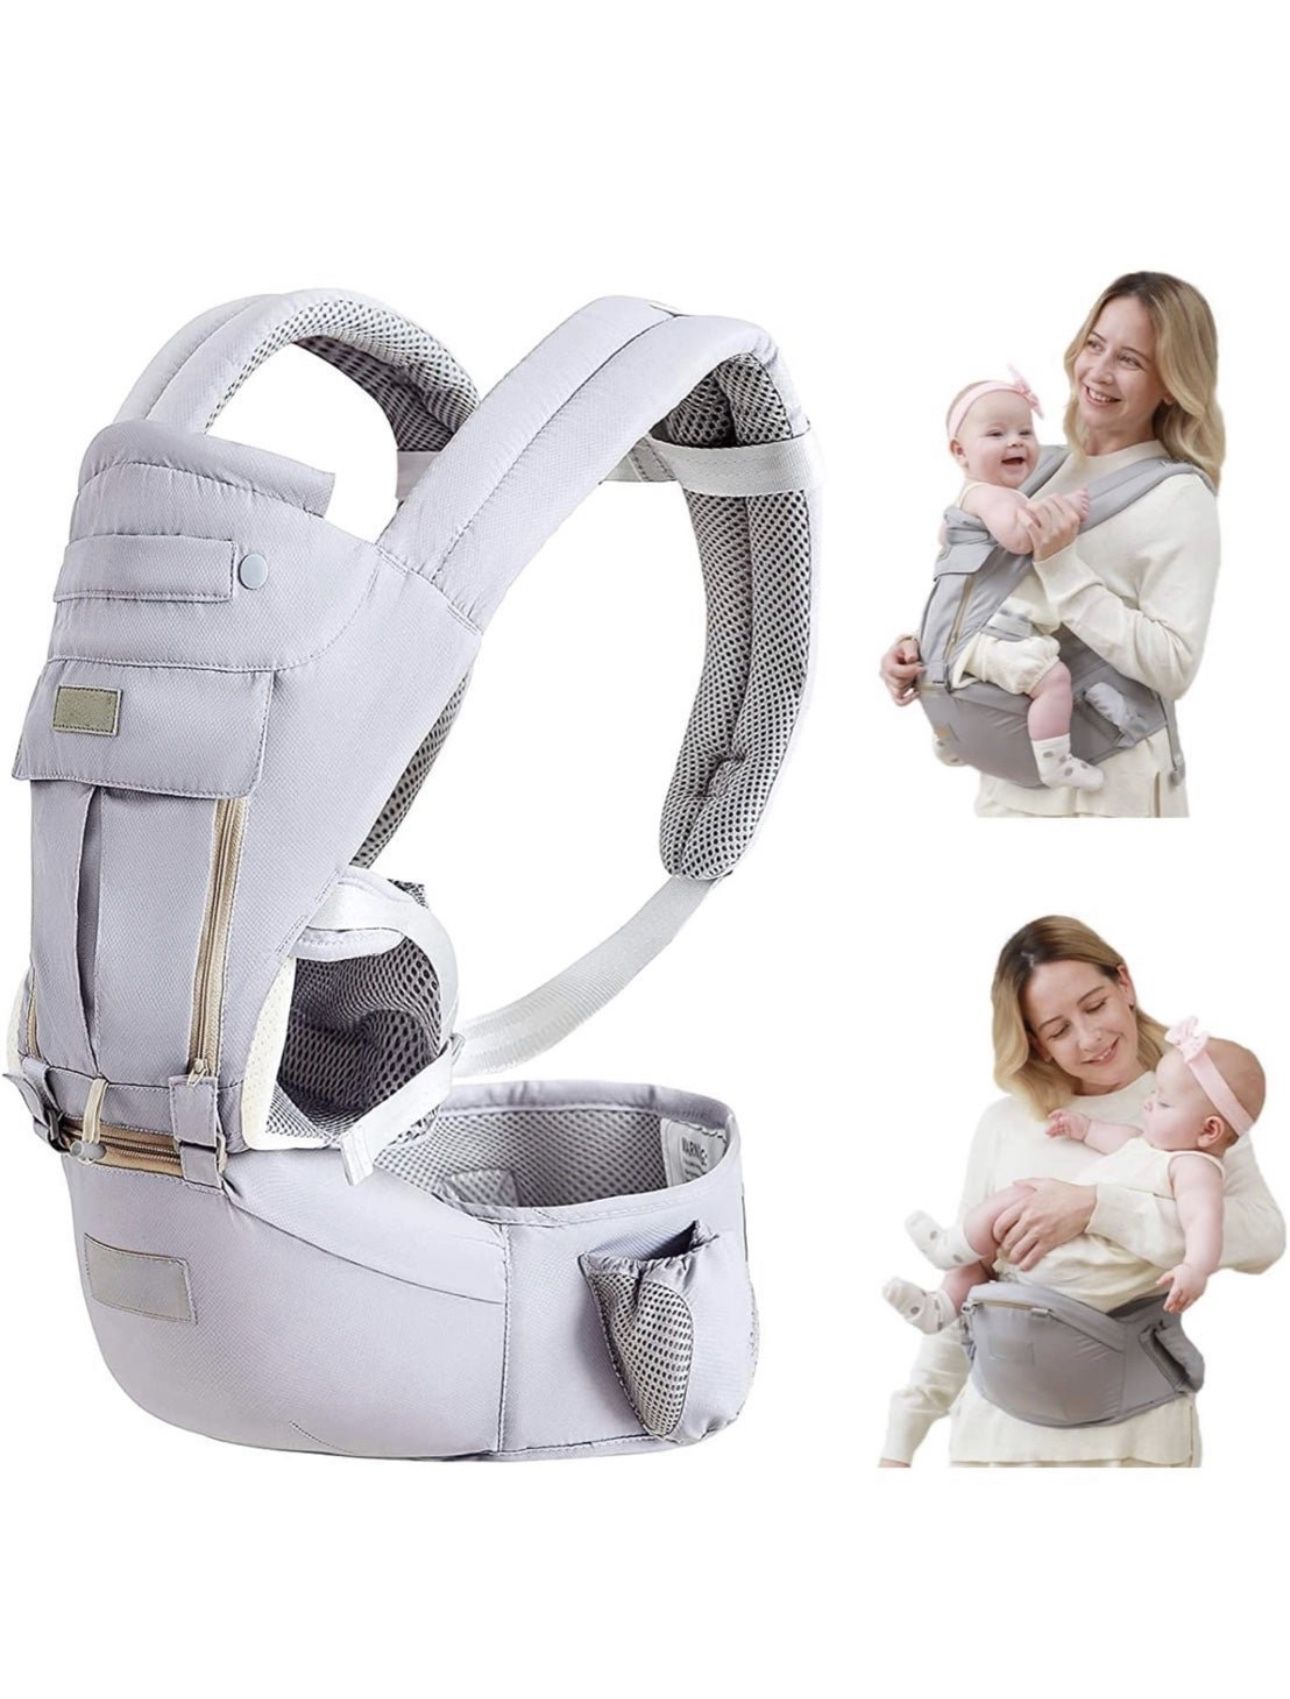 Baby Carrier with Hip Seat, Baby Carrier Newborn to Toddler, Baby Hip Seat Carrier for 7 -66lbs, All Seasons Baby Holder Carrier, All Position.(Light 